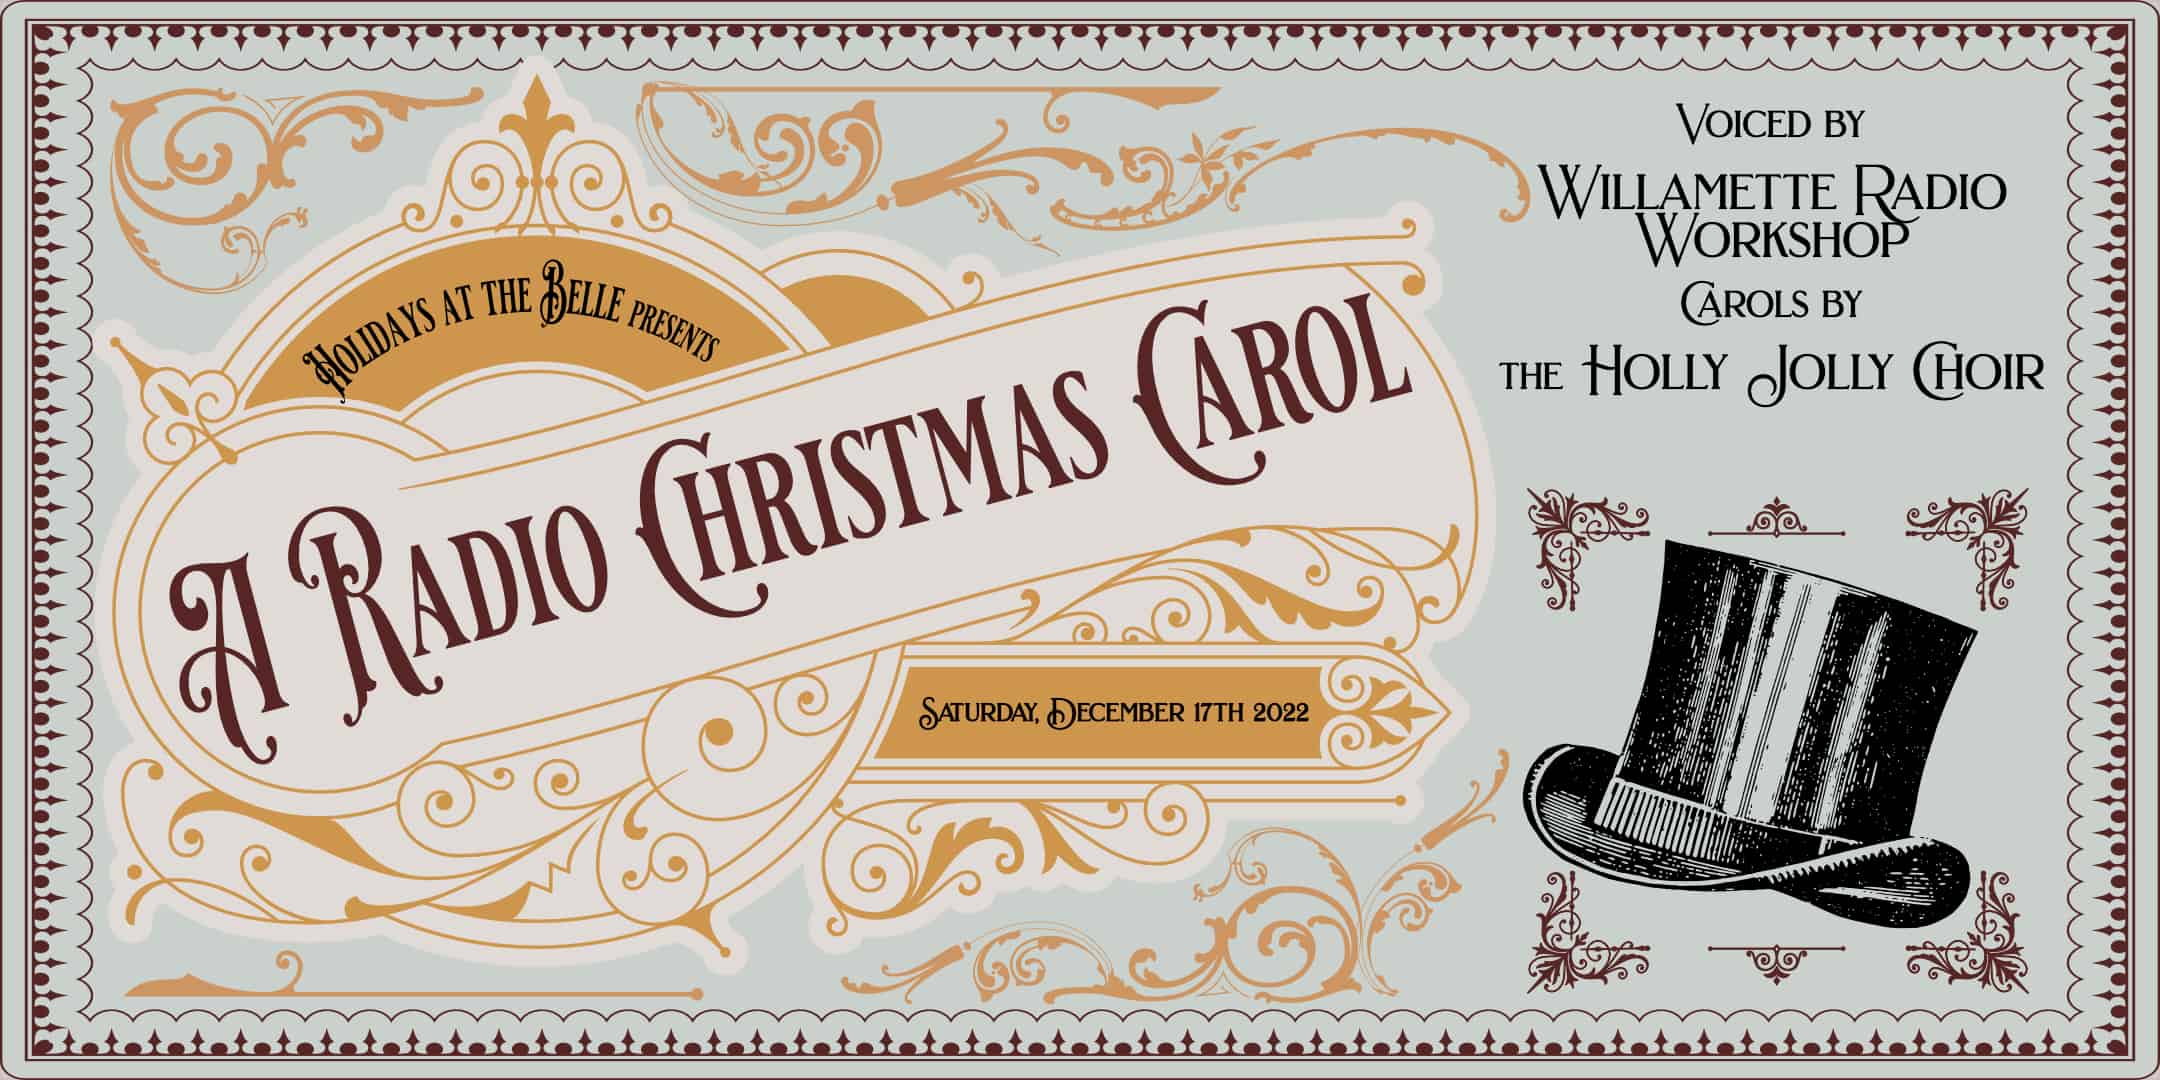 Holidays at the Belle presents 'A Radio Christmas Carol' on Saturday, December 17th, 2022. Voiced be Willamette Radio Workshop. Carols by the Holly Jolly Choir